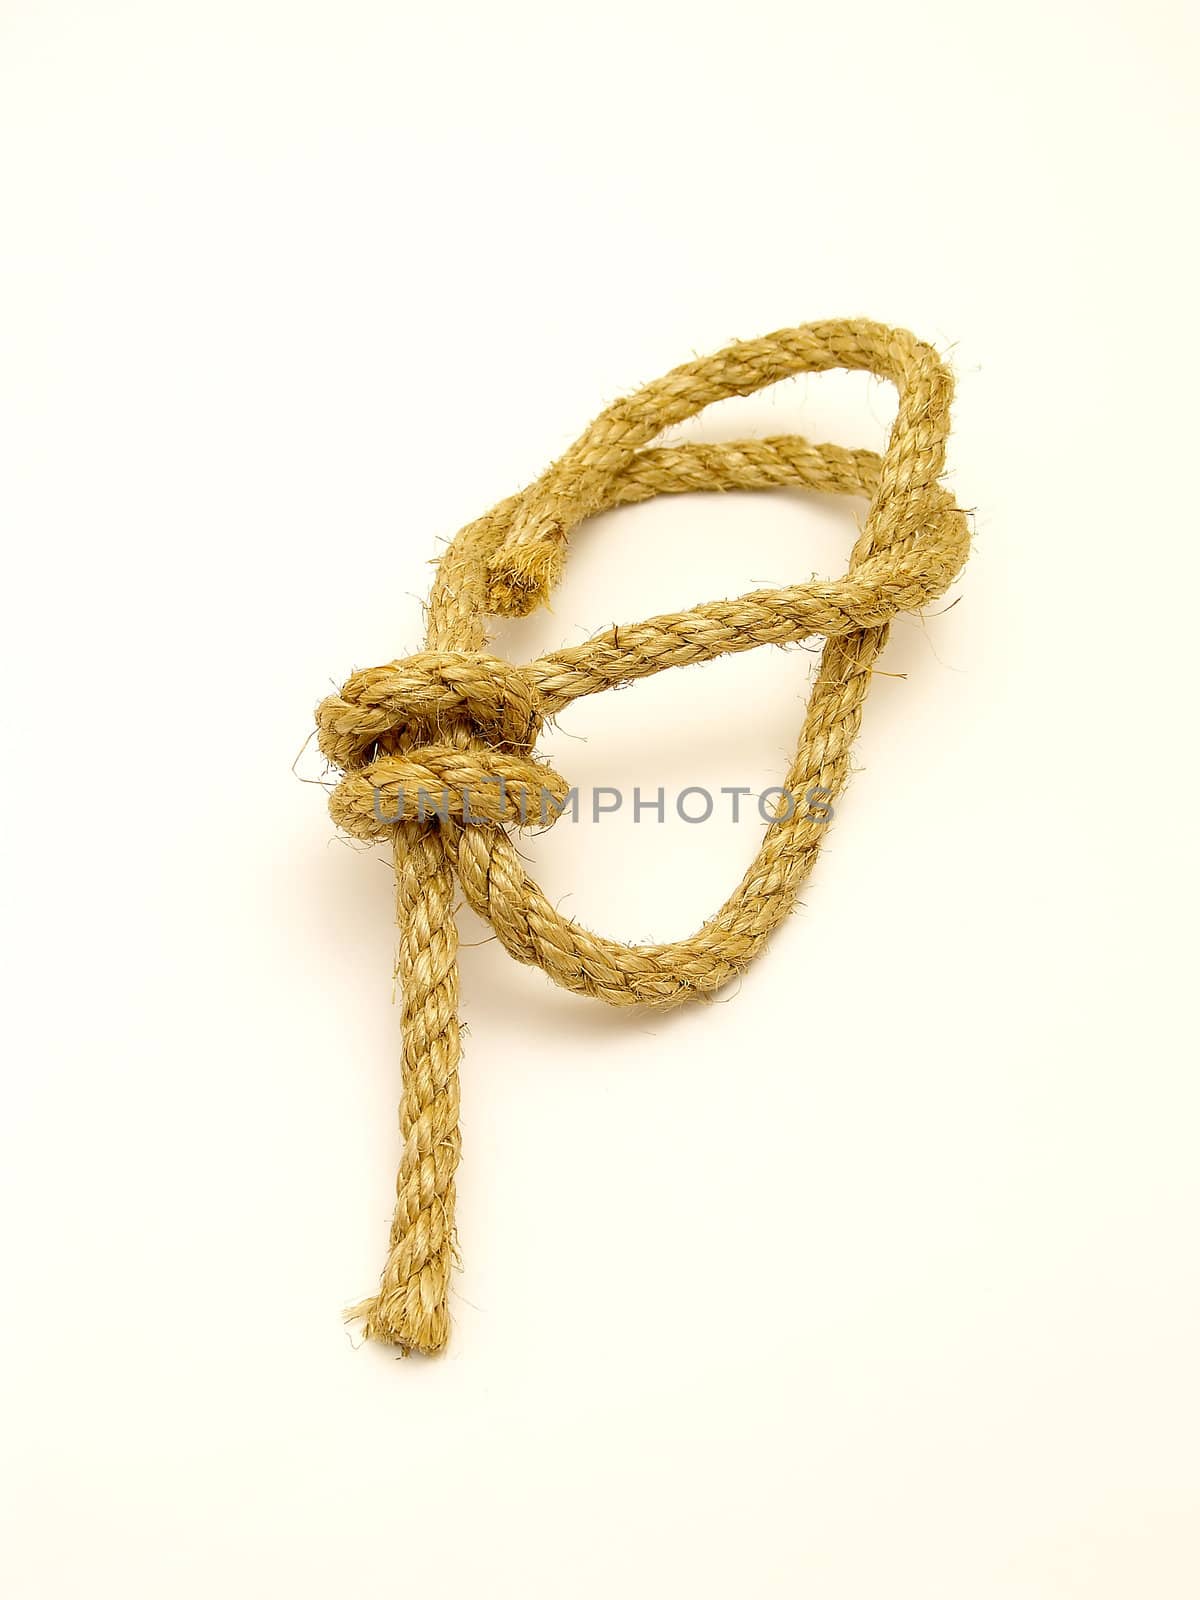 	
rope isolated on a white background